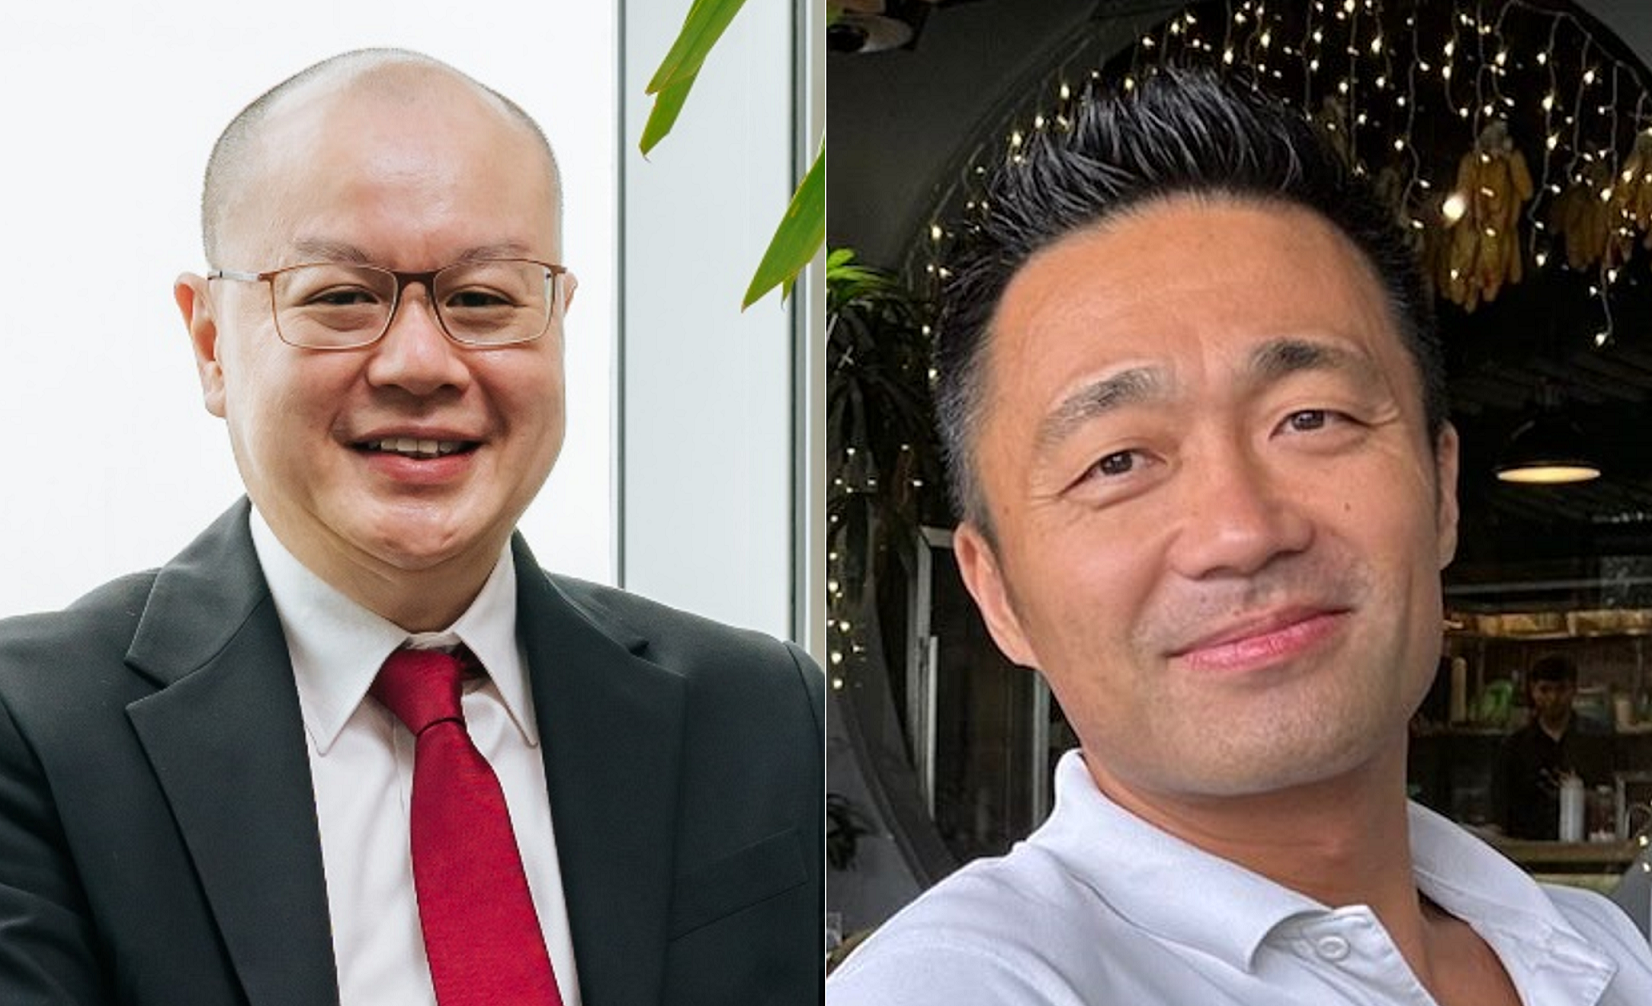 (L-R) Vincent Yong, Managing Director, DHL Global Forwarding Thailand, and Anders Hasselstroem, Senior Vice President, Marketing and Sales, DHL Global Forwarding Asia Pacific